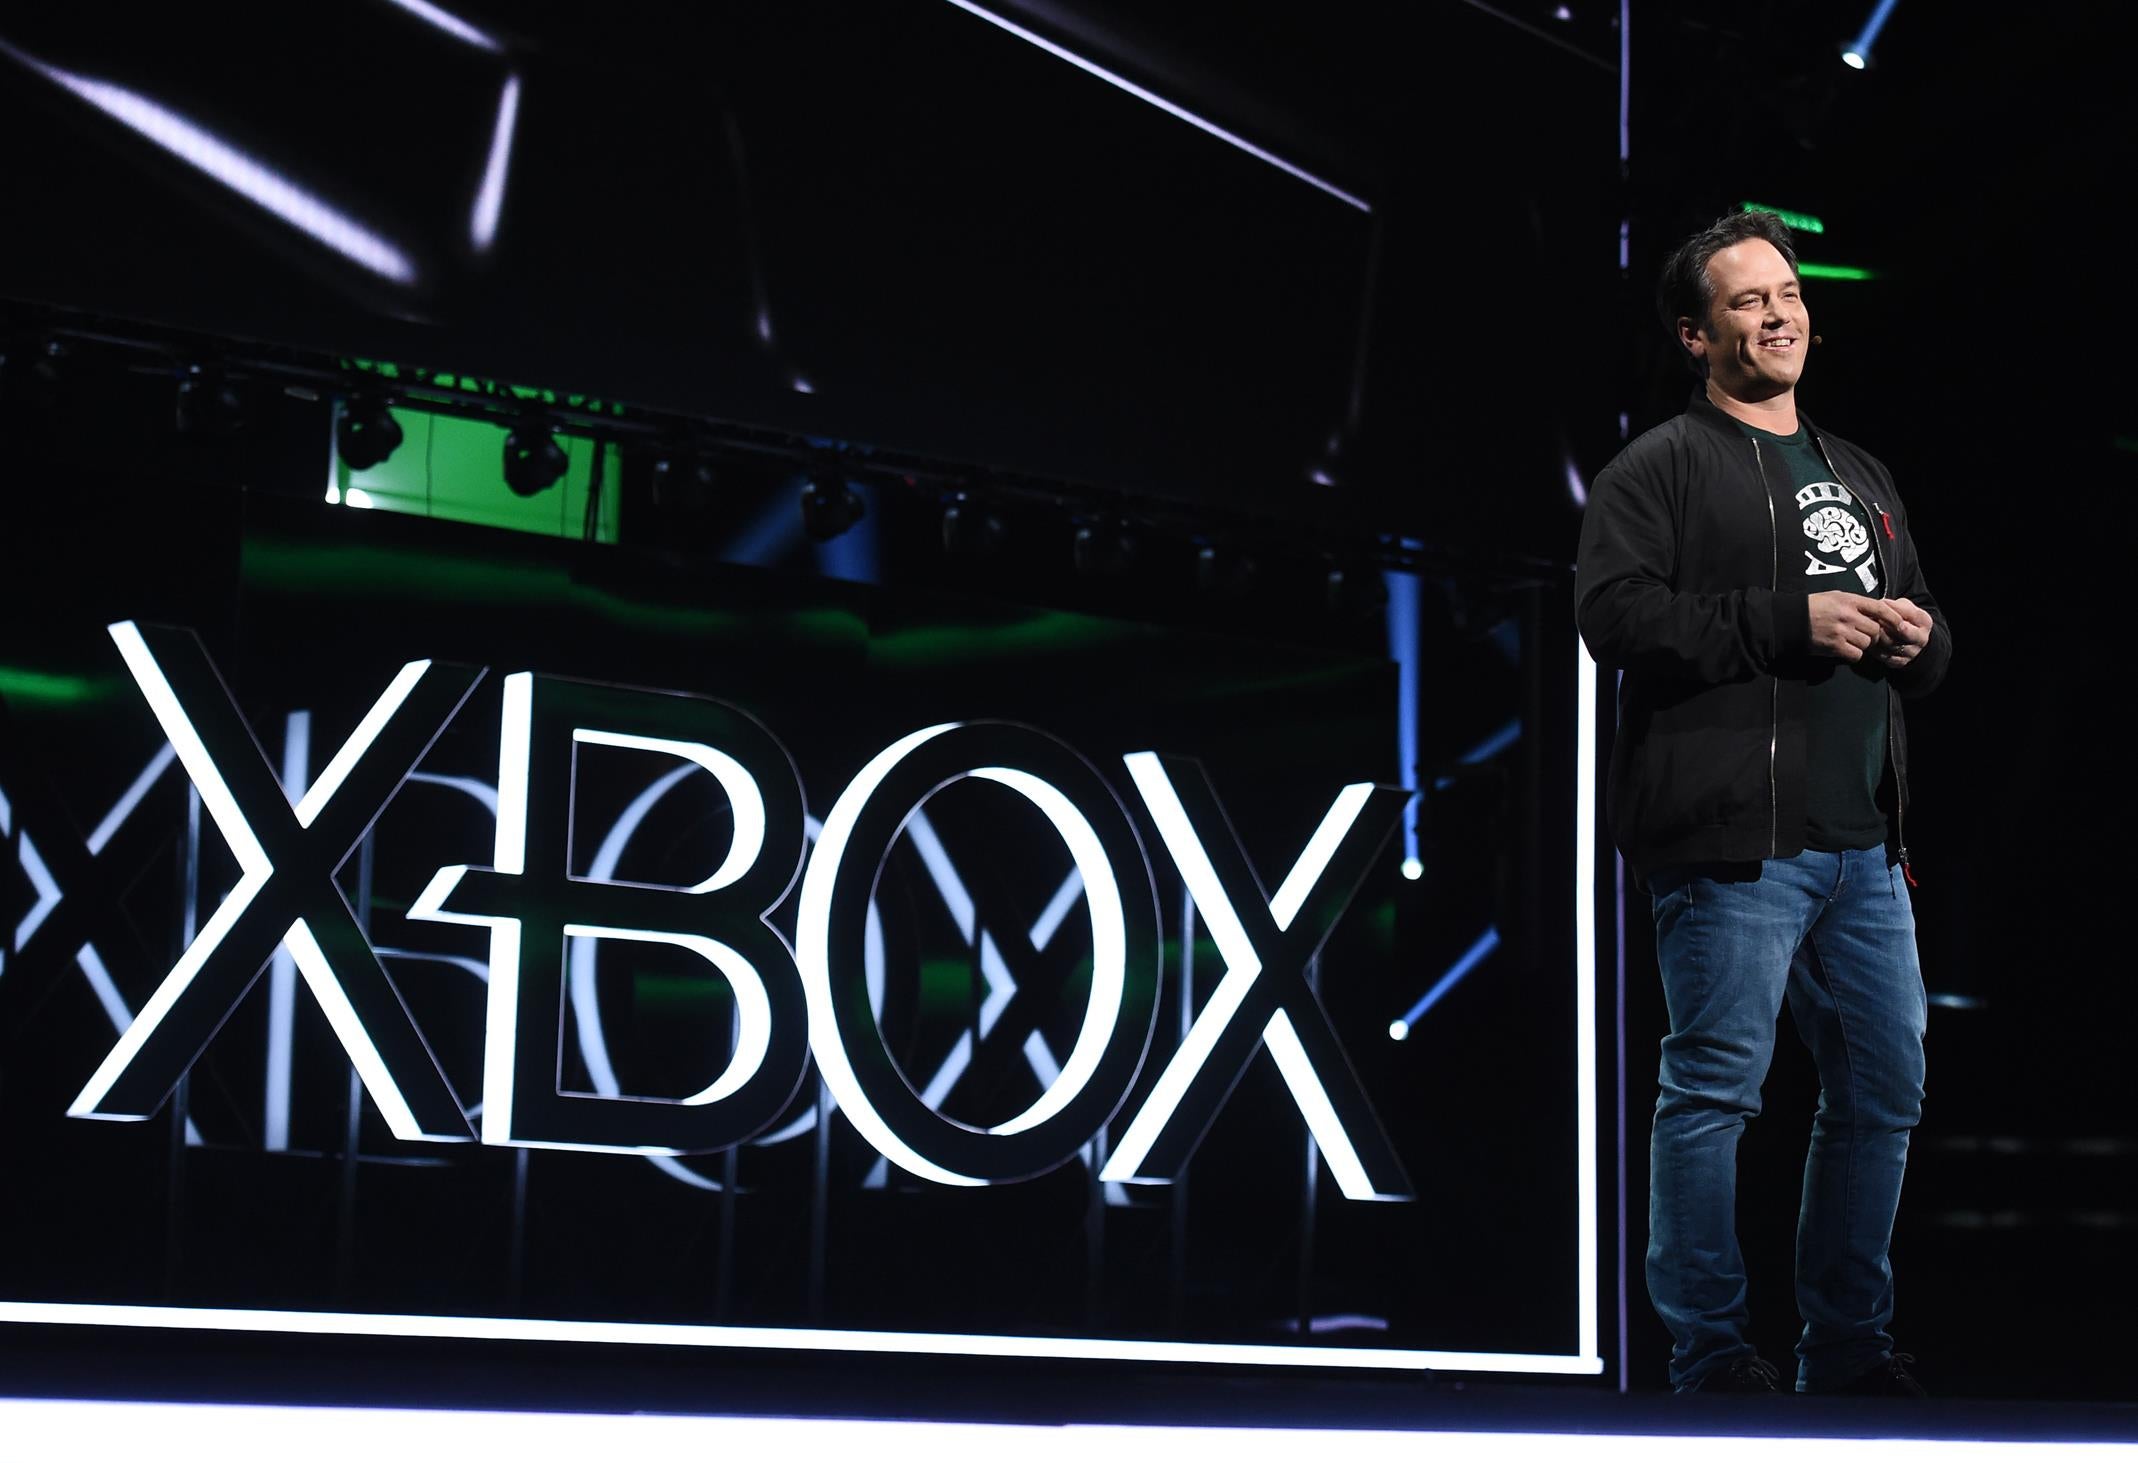 Image for Now that E3 2020 is cancelled, Xbox will host its own digital event